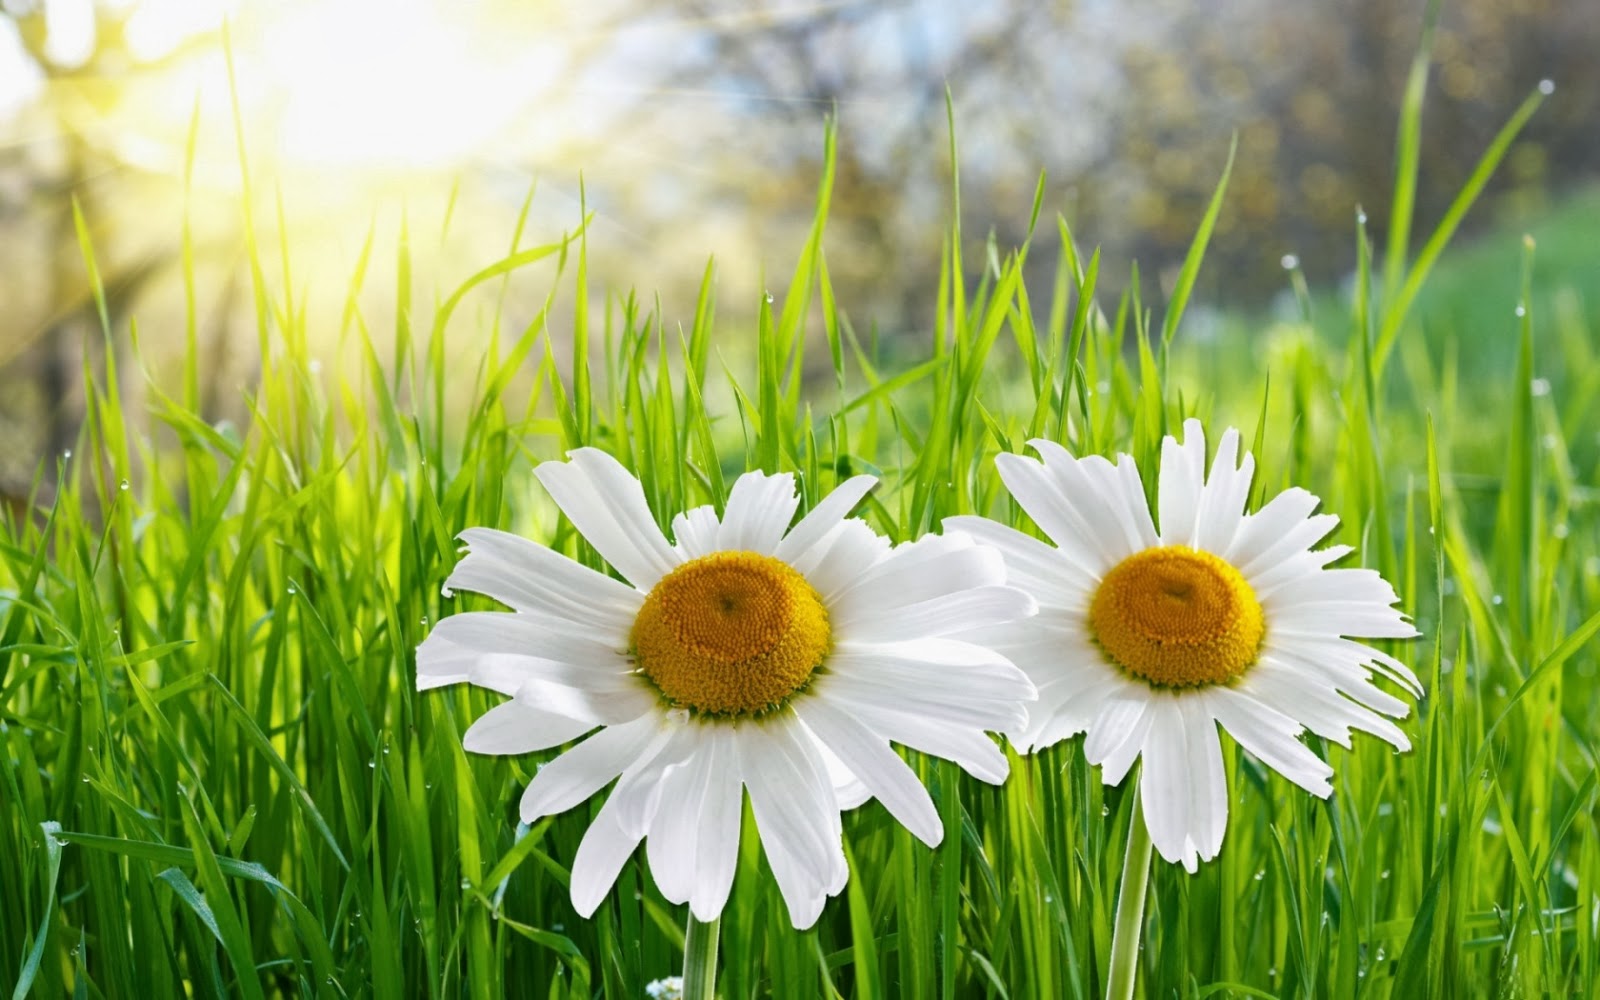 Daisy Flower Wallpaper And Make This For Your